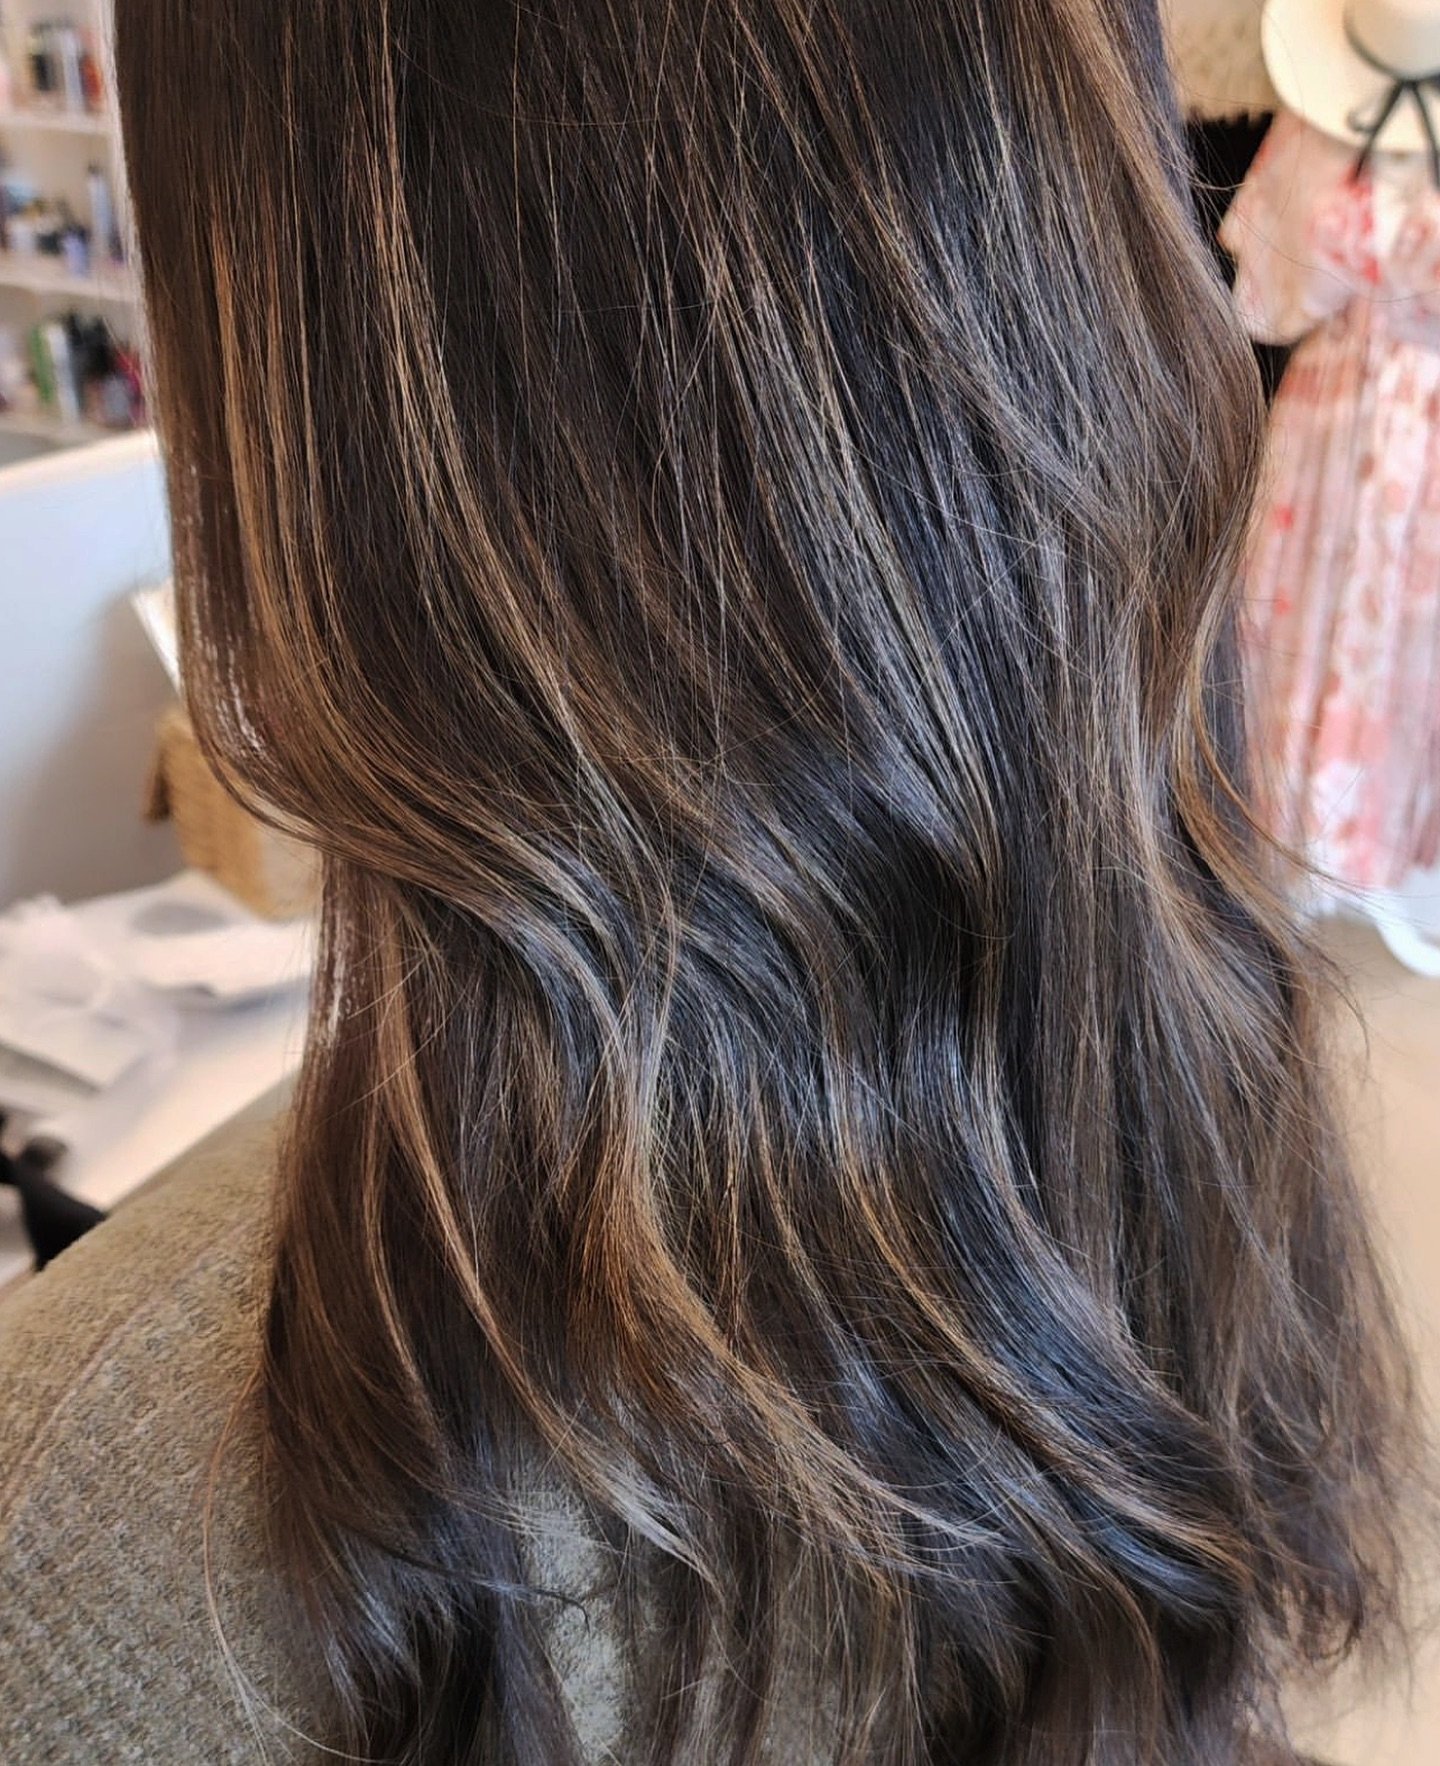 Salted caramel cold brew 🤎

Hair by Lisa

Buy two products and receive the third for 50% off! You&rsquo;ll also be entered to win a free liter-sized shampoo and conditioner 😊

.
.
.
.
.
Howell, Brighton, Pinckney, Hartland, Fowlerville, Michigan, l